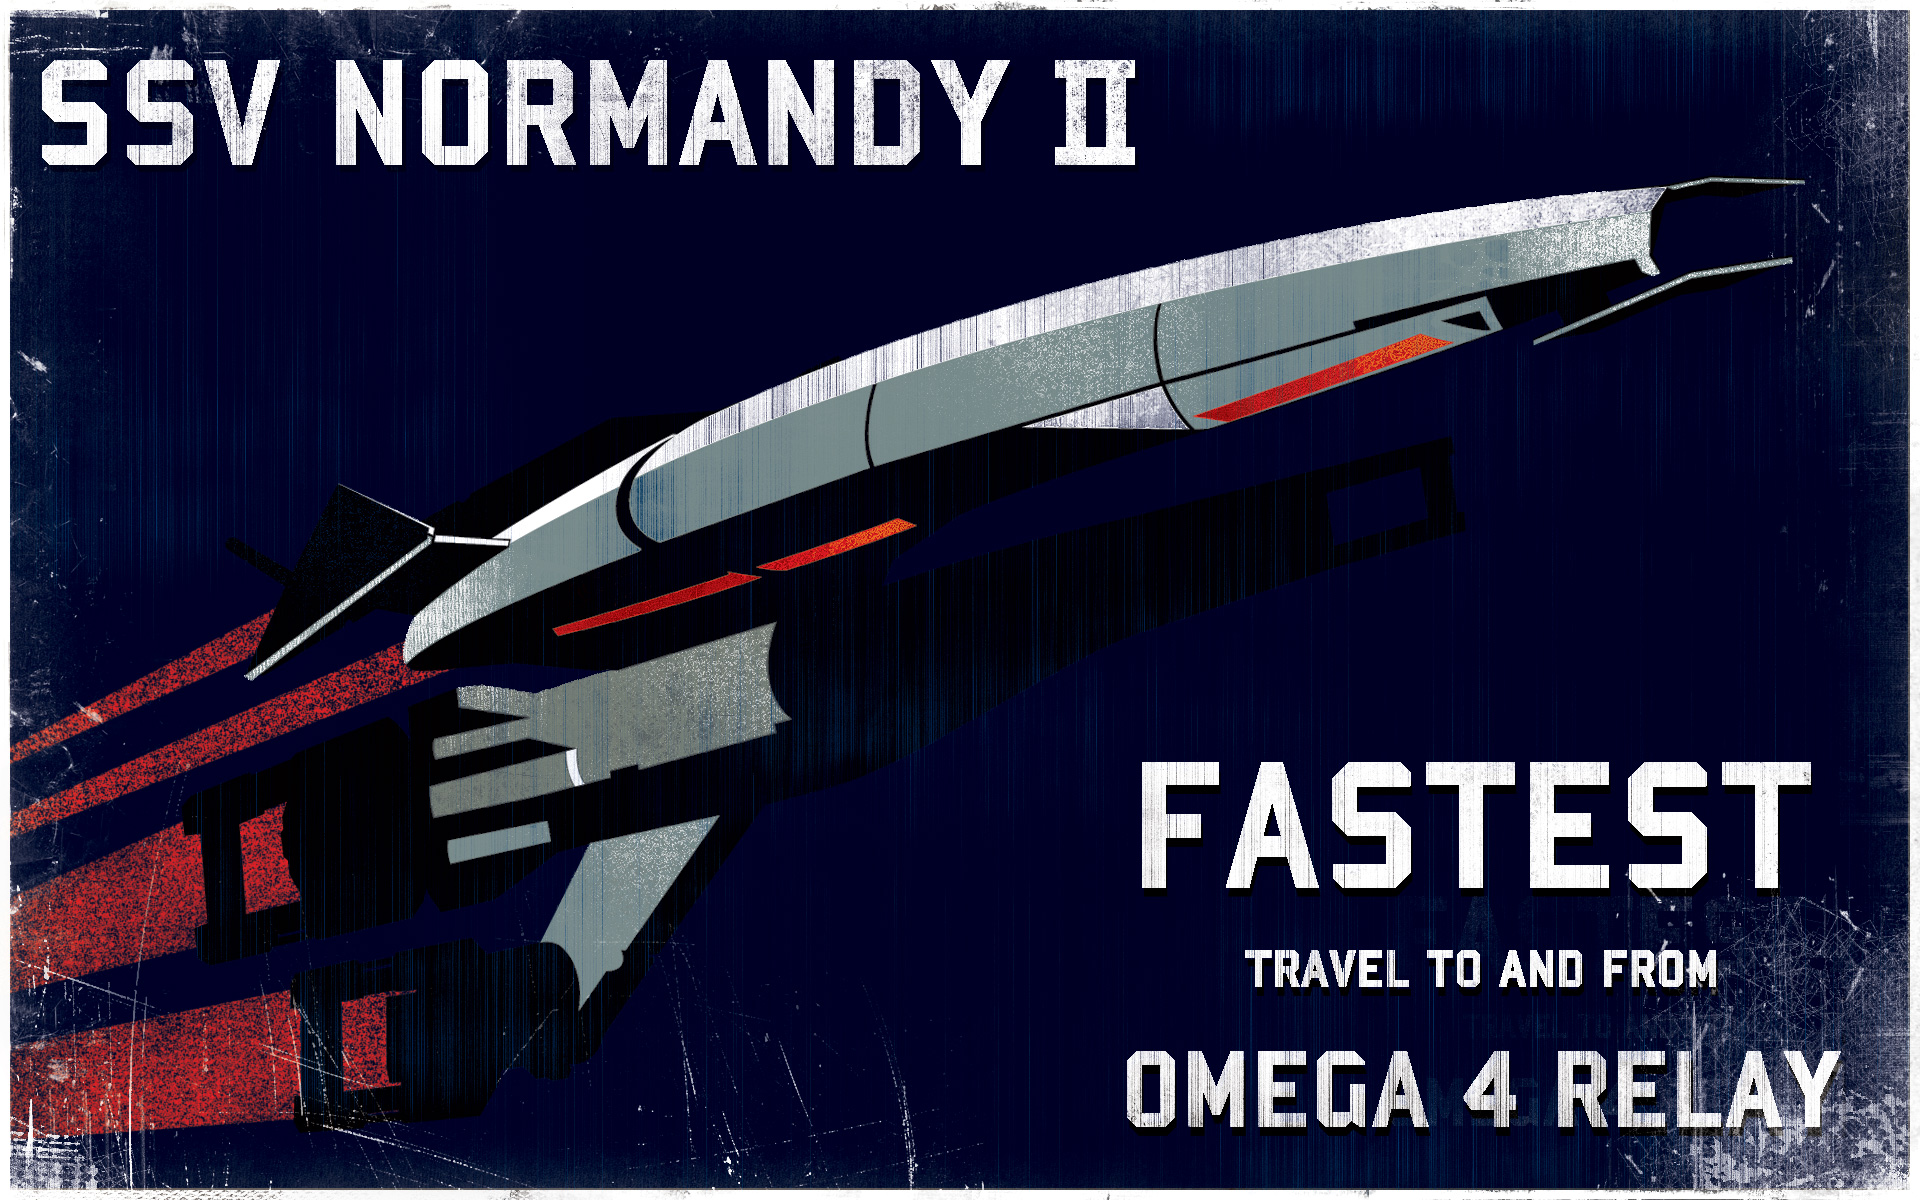 portrait mass effect normandy - Ssv Normandy Di Fastest Travel To And From Omega 4 Relay